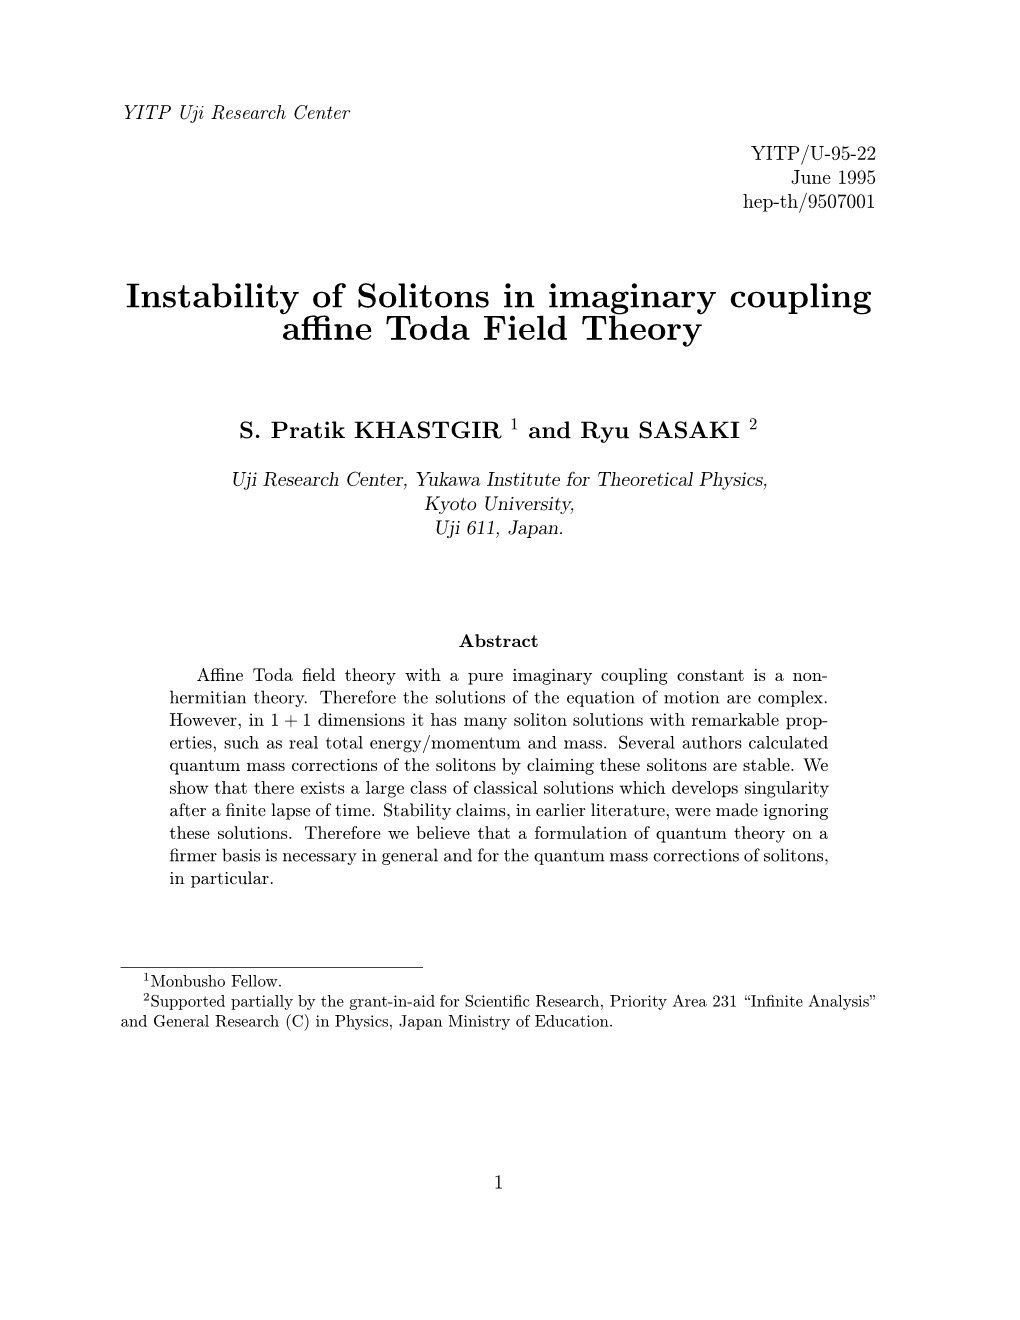 Instability of Solitons in Imaginary Coupling Affine Toda Field Theory